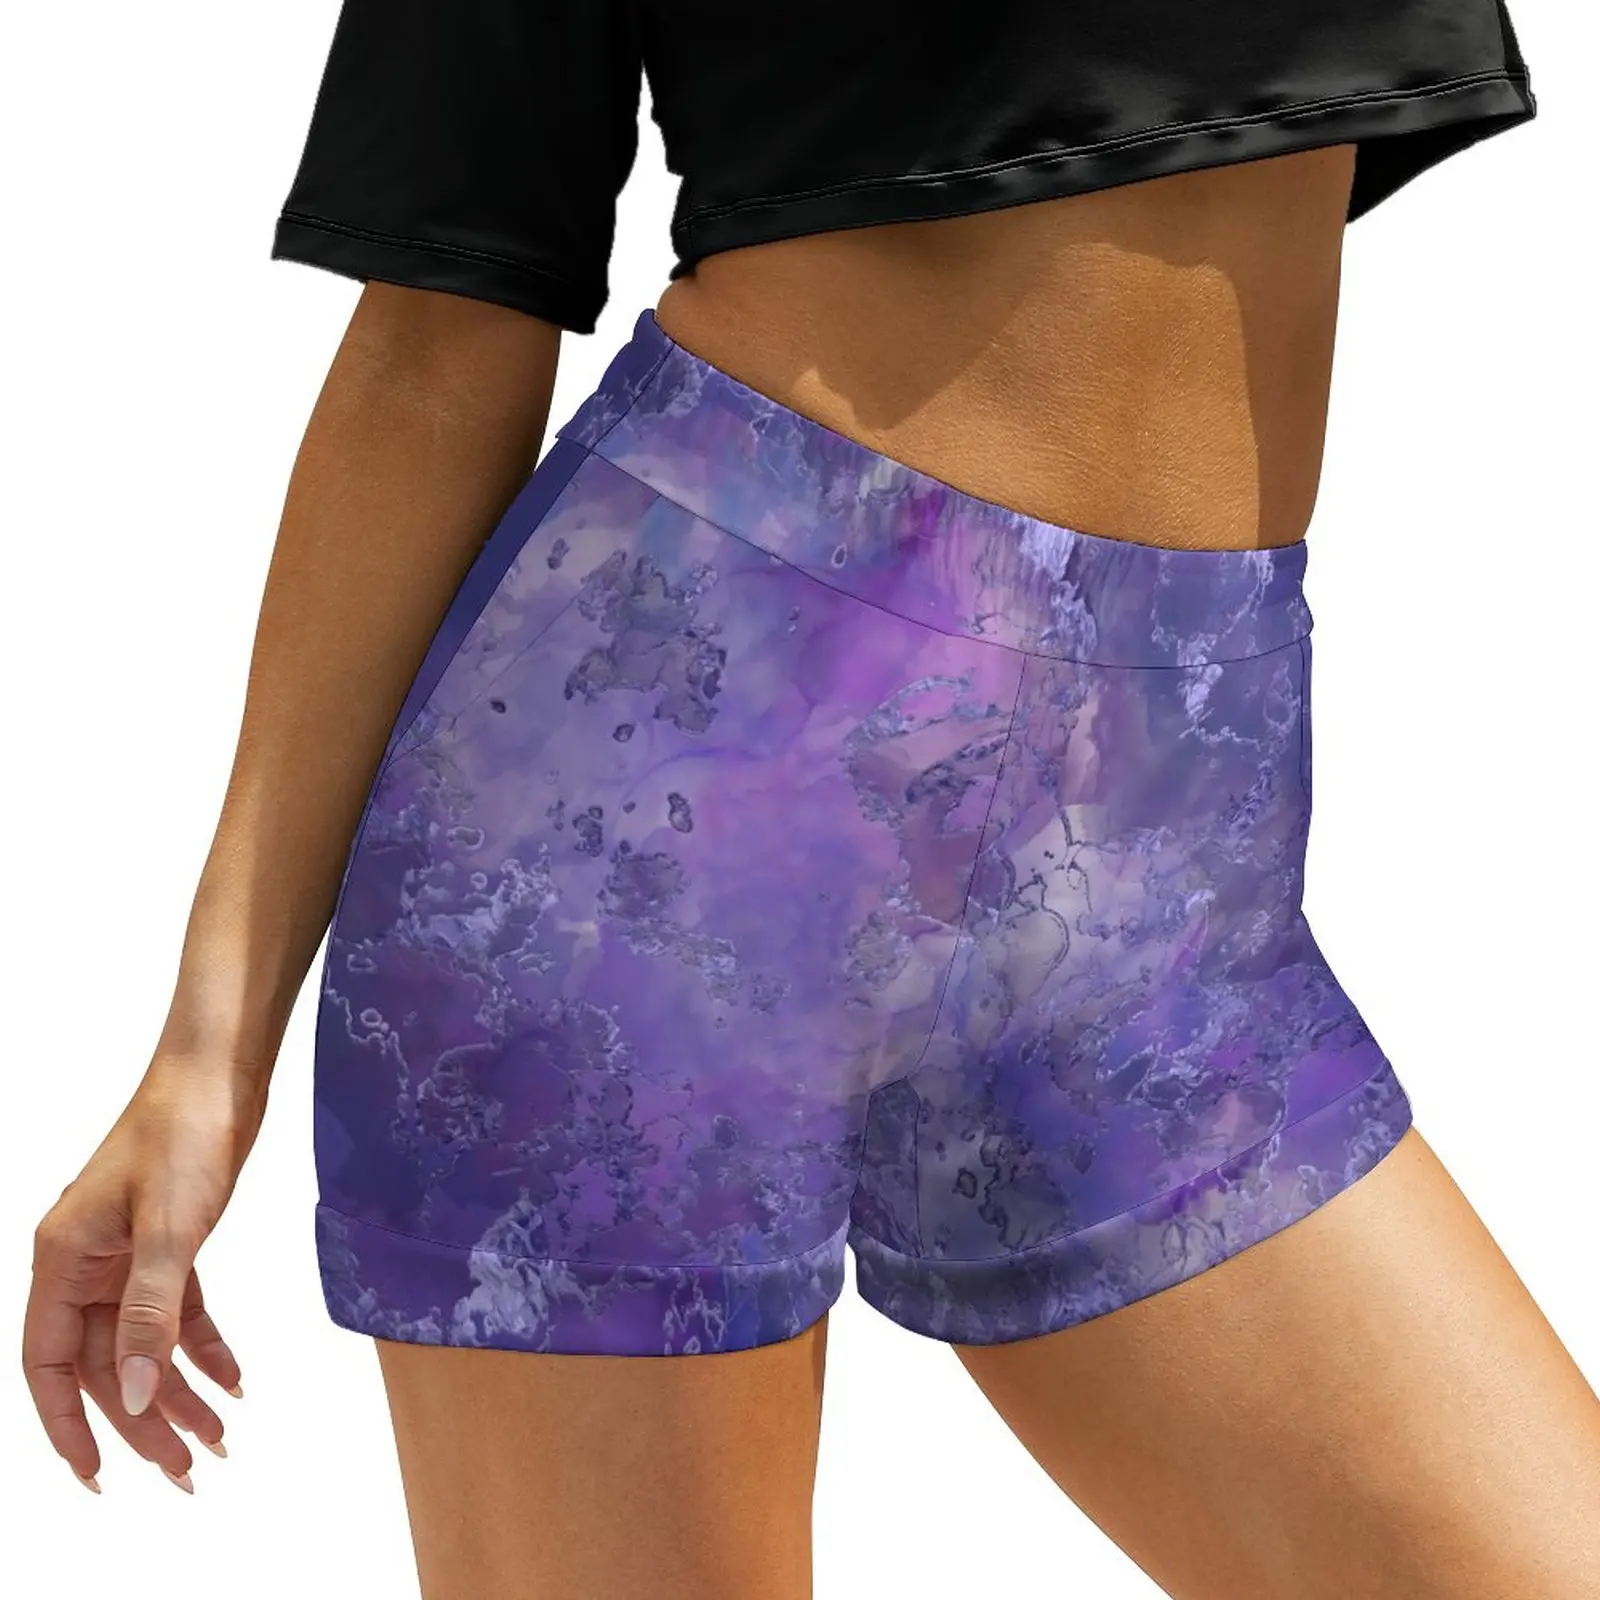 Marble Ink Shorts High Waist Stained Glass Print Y2k Print Shorts Trendy Oversize Short Pants Streetwear Bottoms Gift